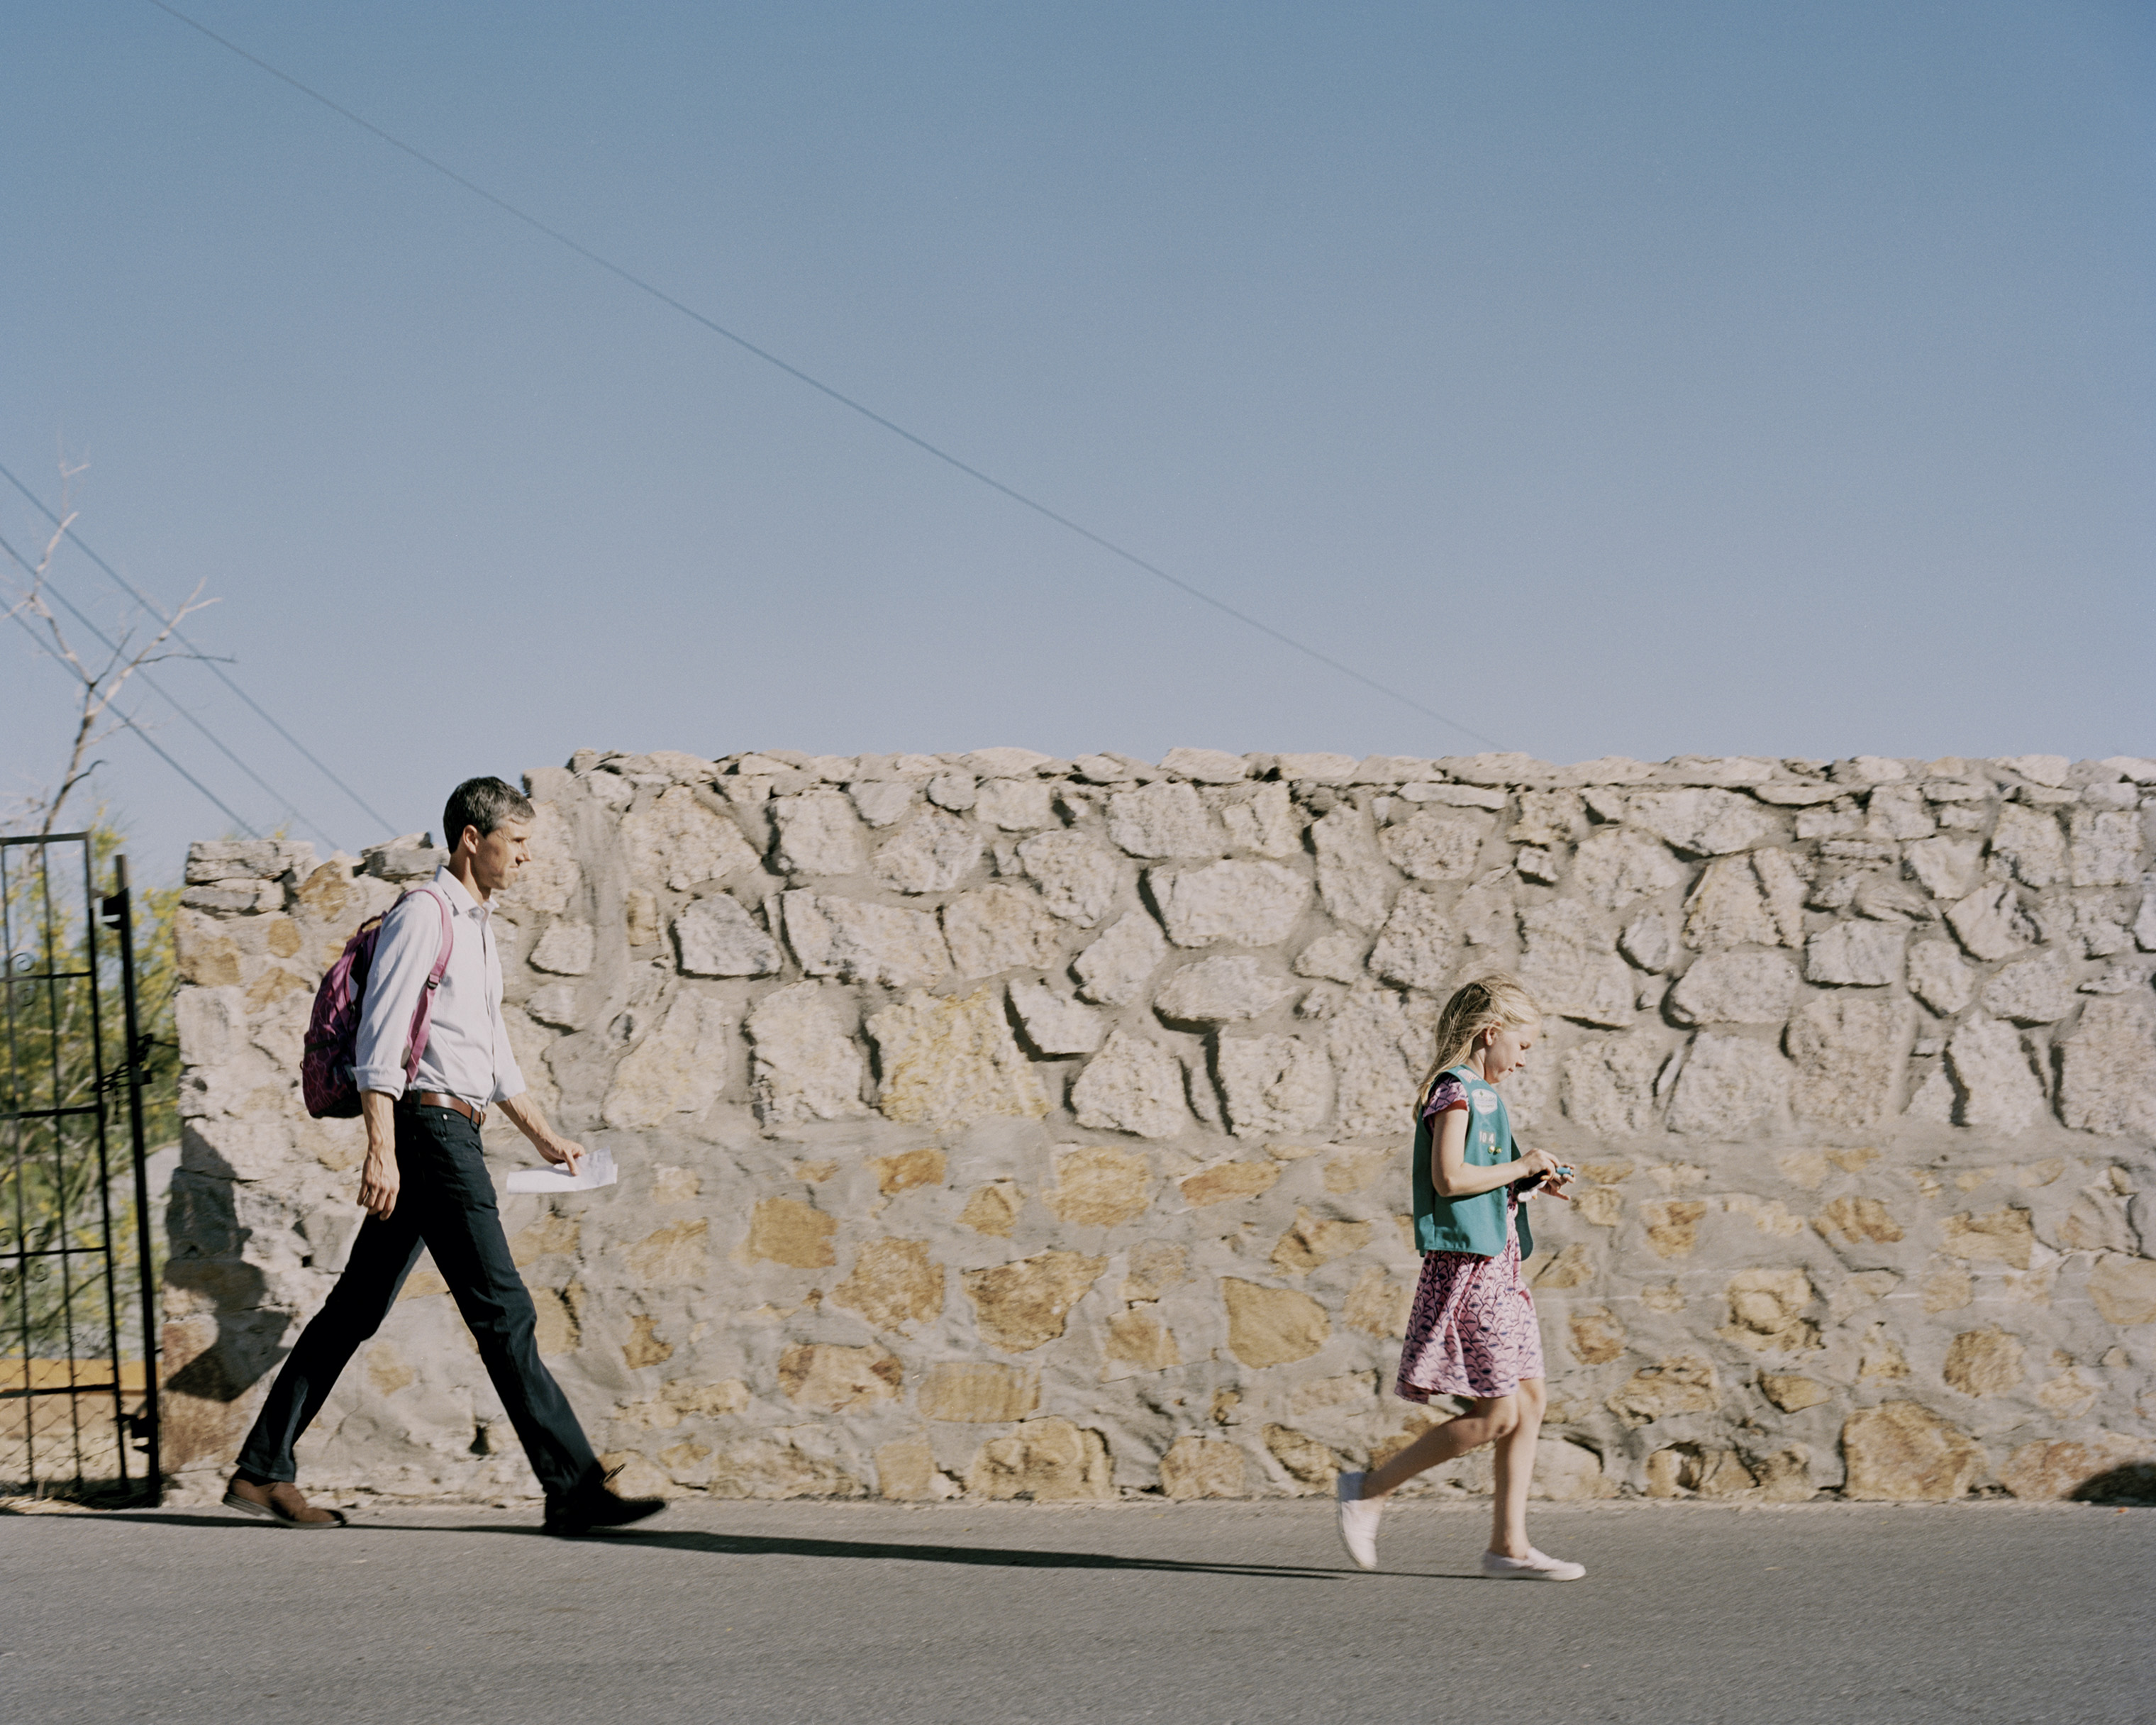 O'Rourke walks home with his daughter Molly, 9, after a poetry slam held by his daughter’s Girl Scout troop. (Benjamin Rasmussen for TIME)